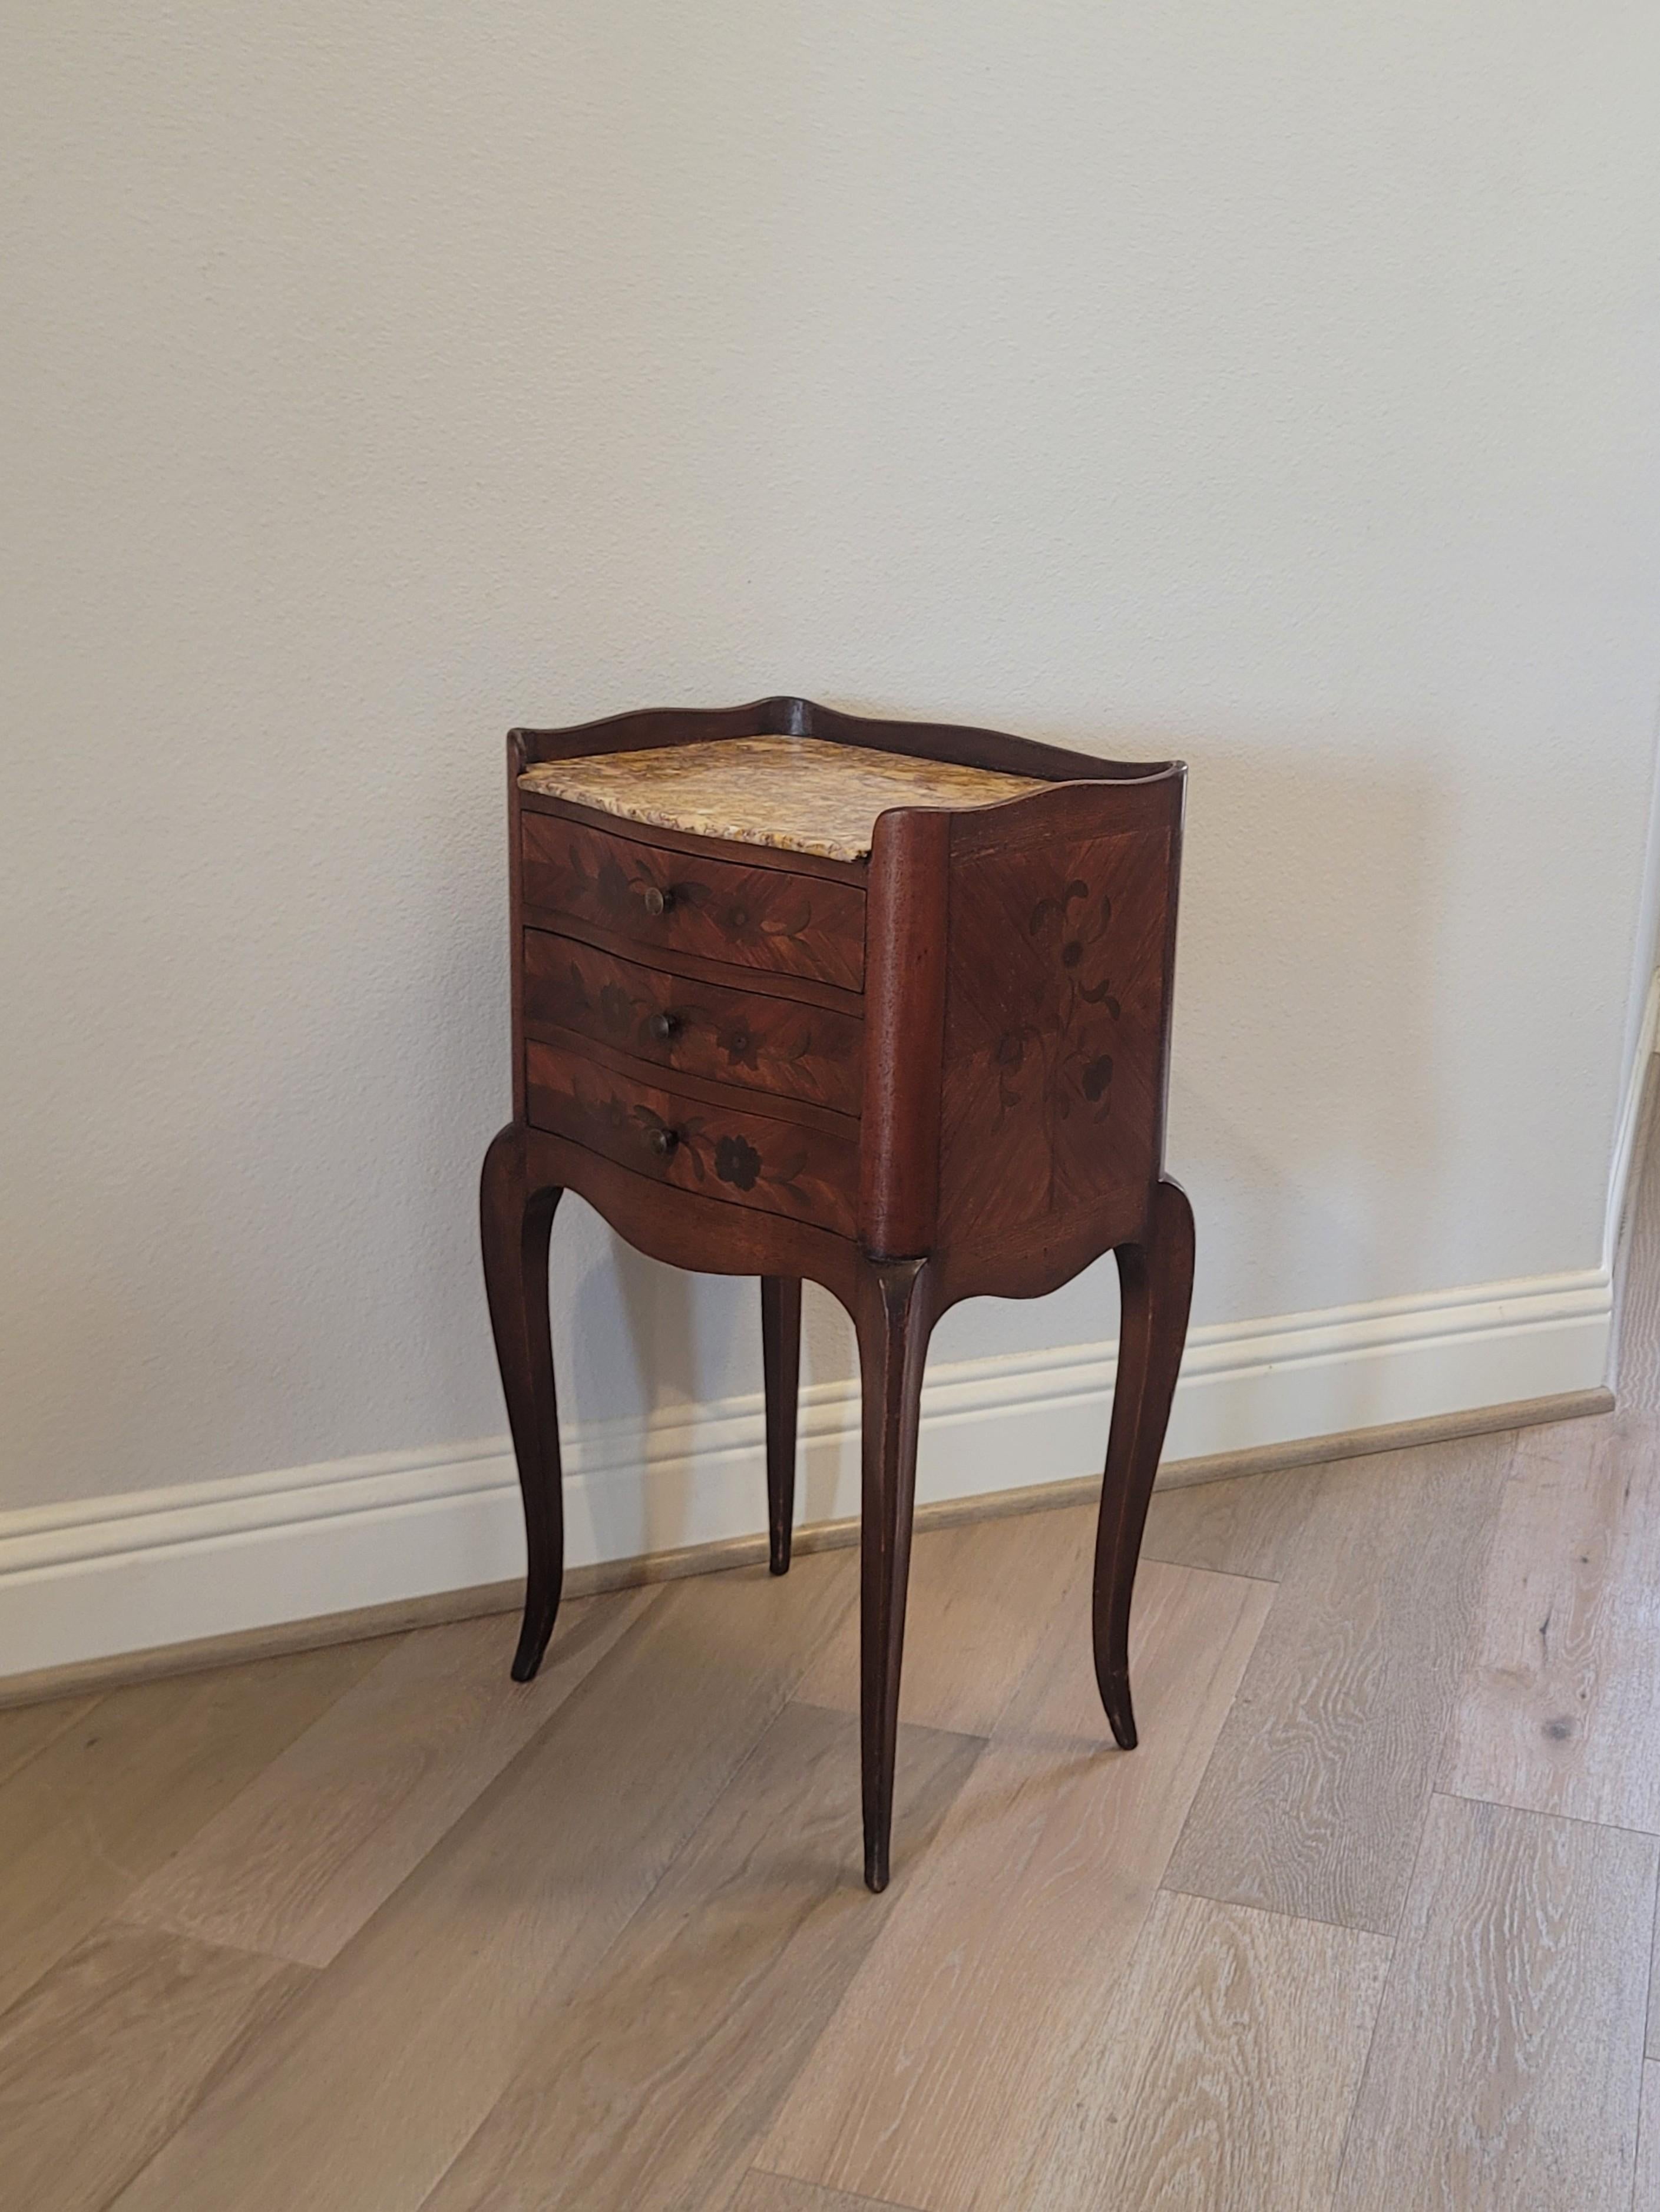 19th Century French Louis XV Style Marquetry Inlaid Nightstand Table For Sale 6